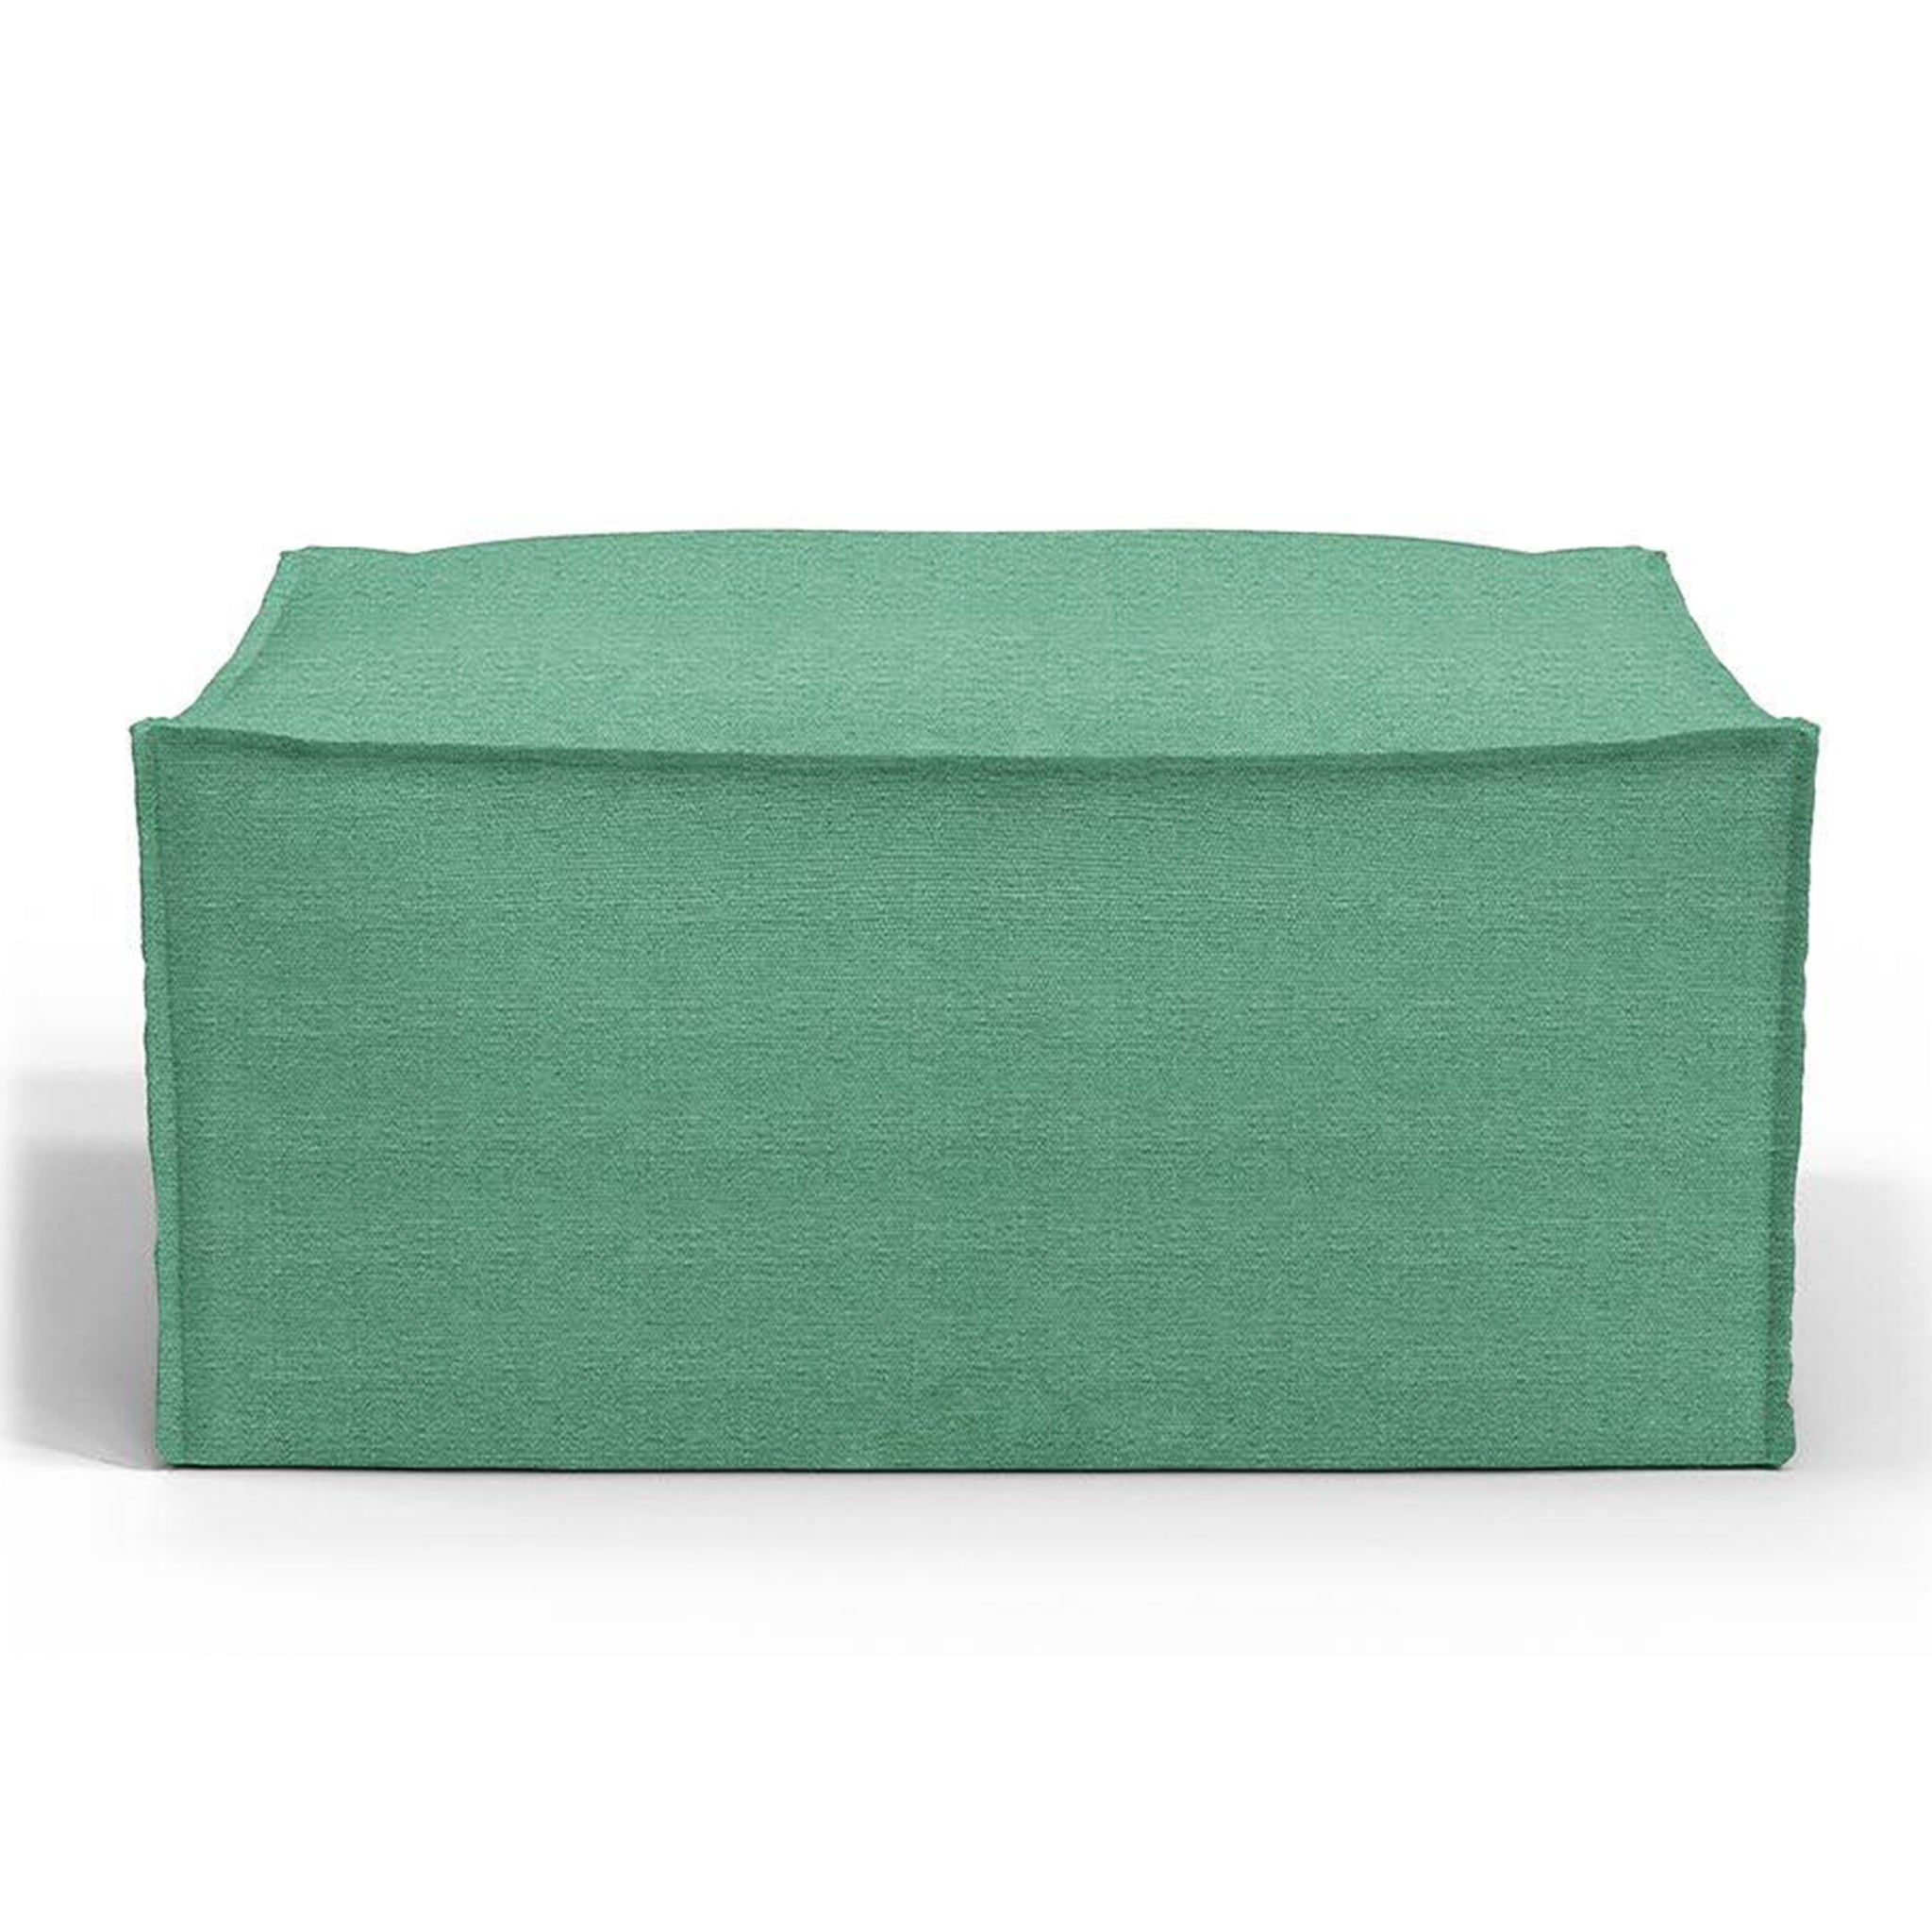 Green ottoman with a modern design, perfect for adding a pop of color to any living room or seating area.